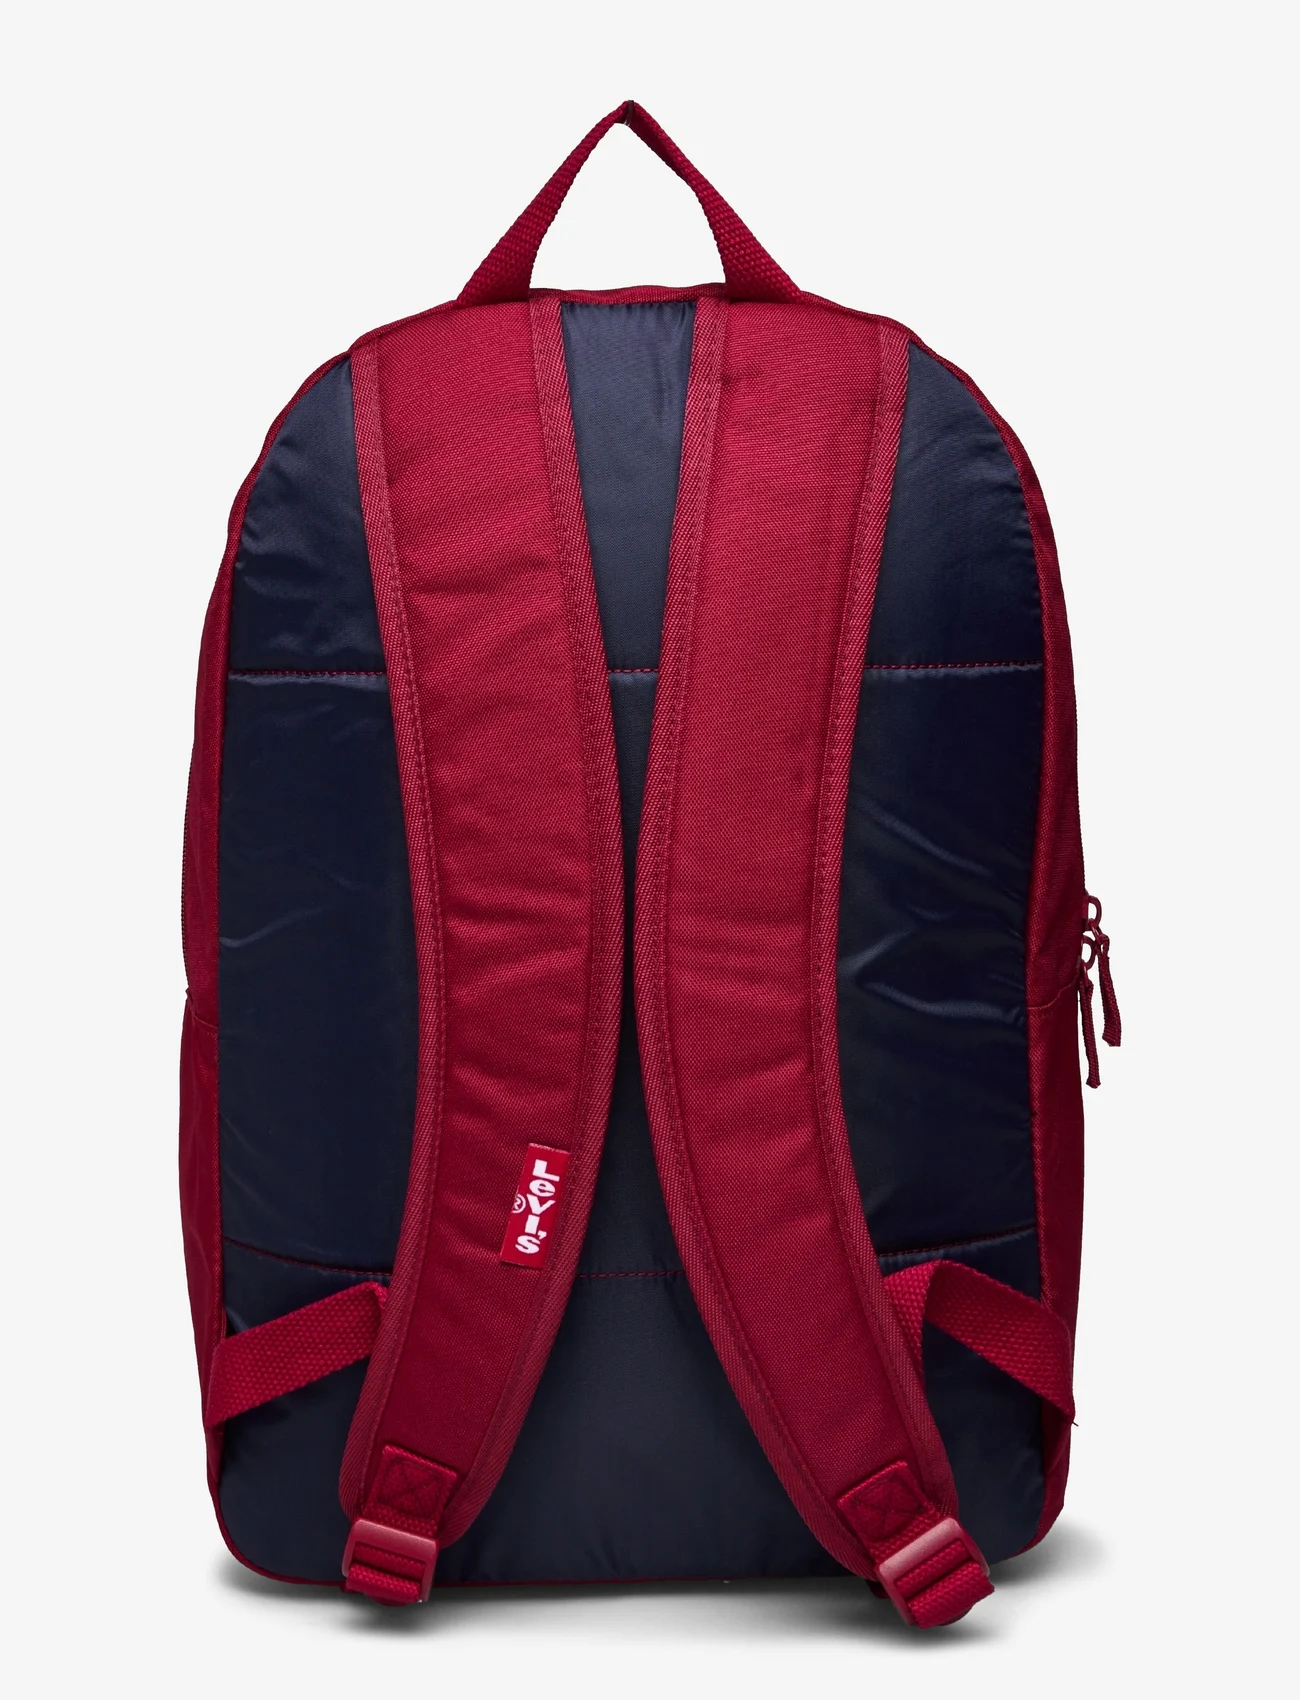 Levi's - Levi's® Core Batwing Backpack - summer savings - red - 1